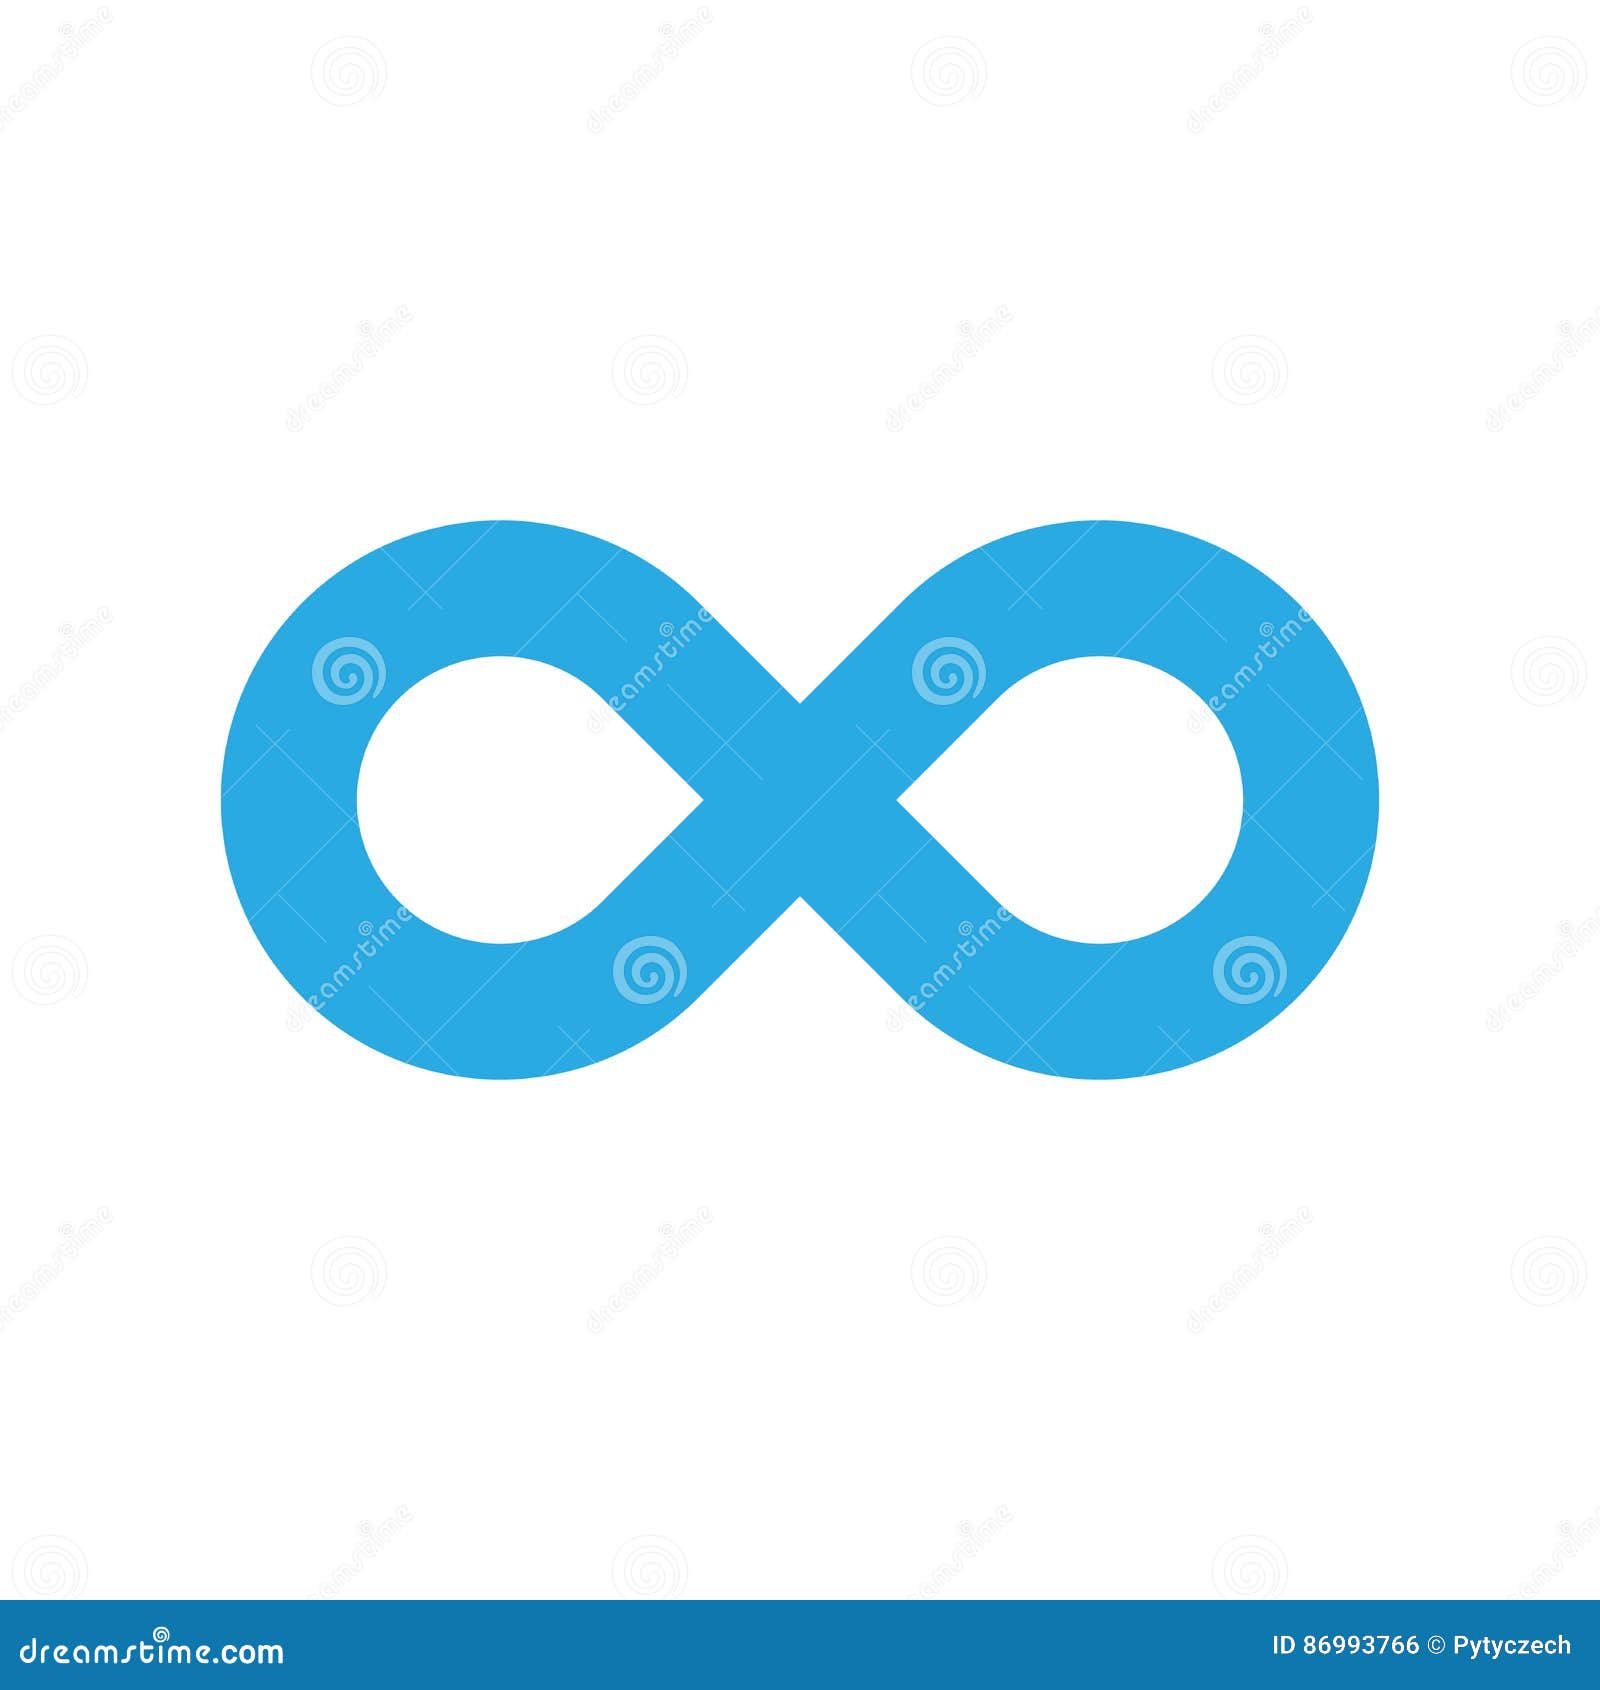 infinity  icon. representing the concept of infinite, limitless and endless things. simple blue  